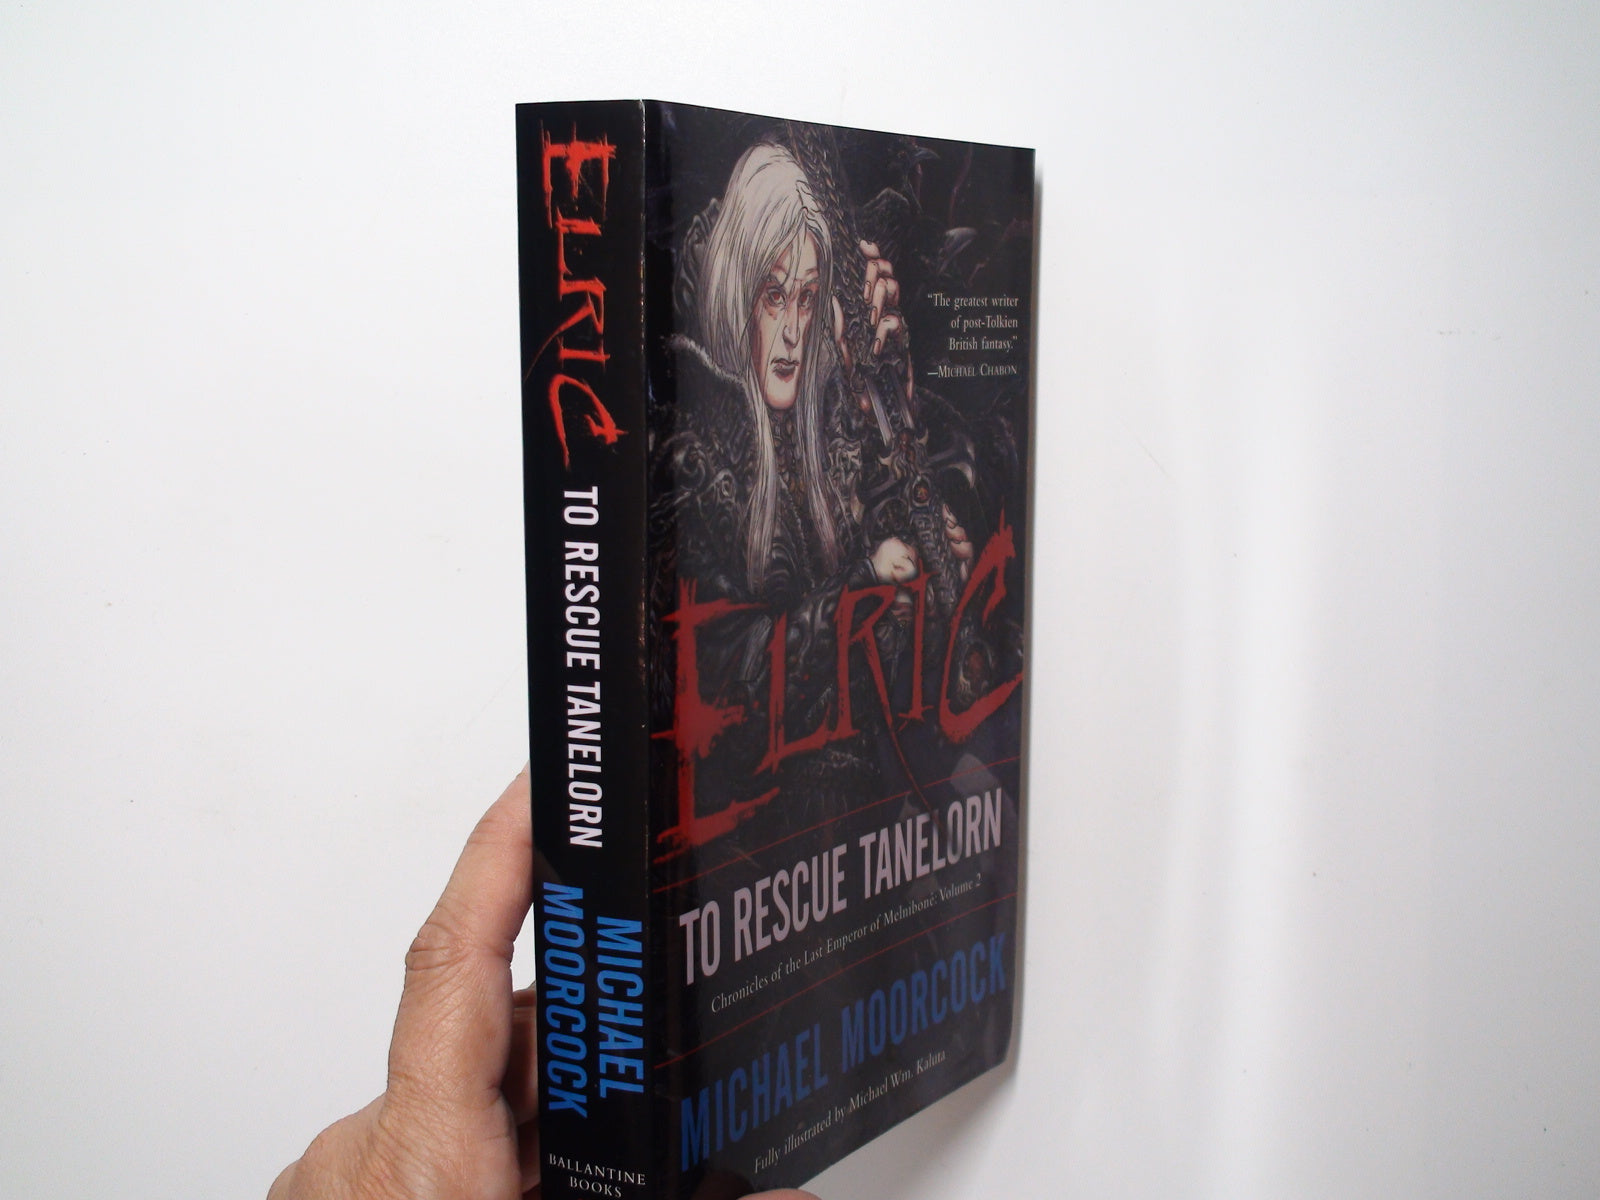 Elric, To Rescue Tanelorn, Michael Moorcock, Paperback, Illustrated, 2008